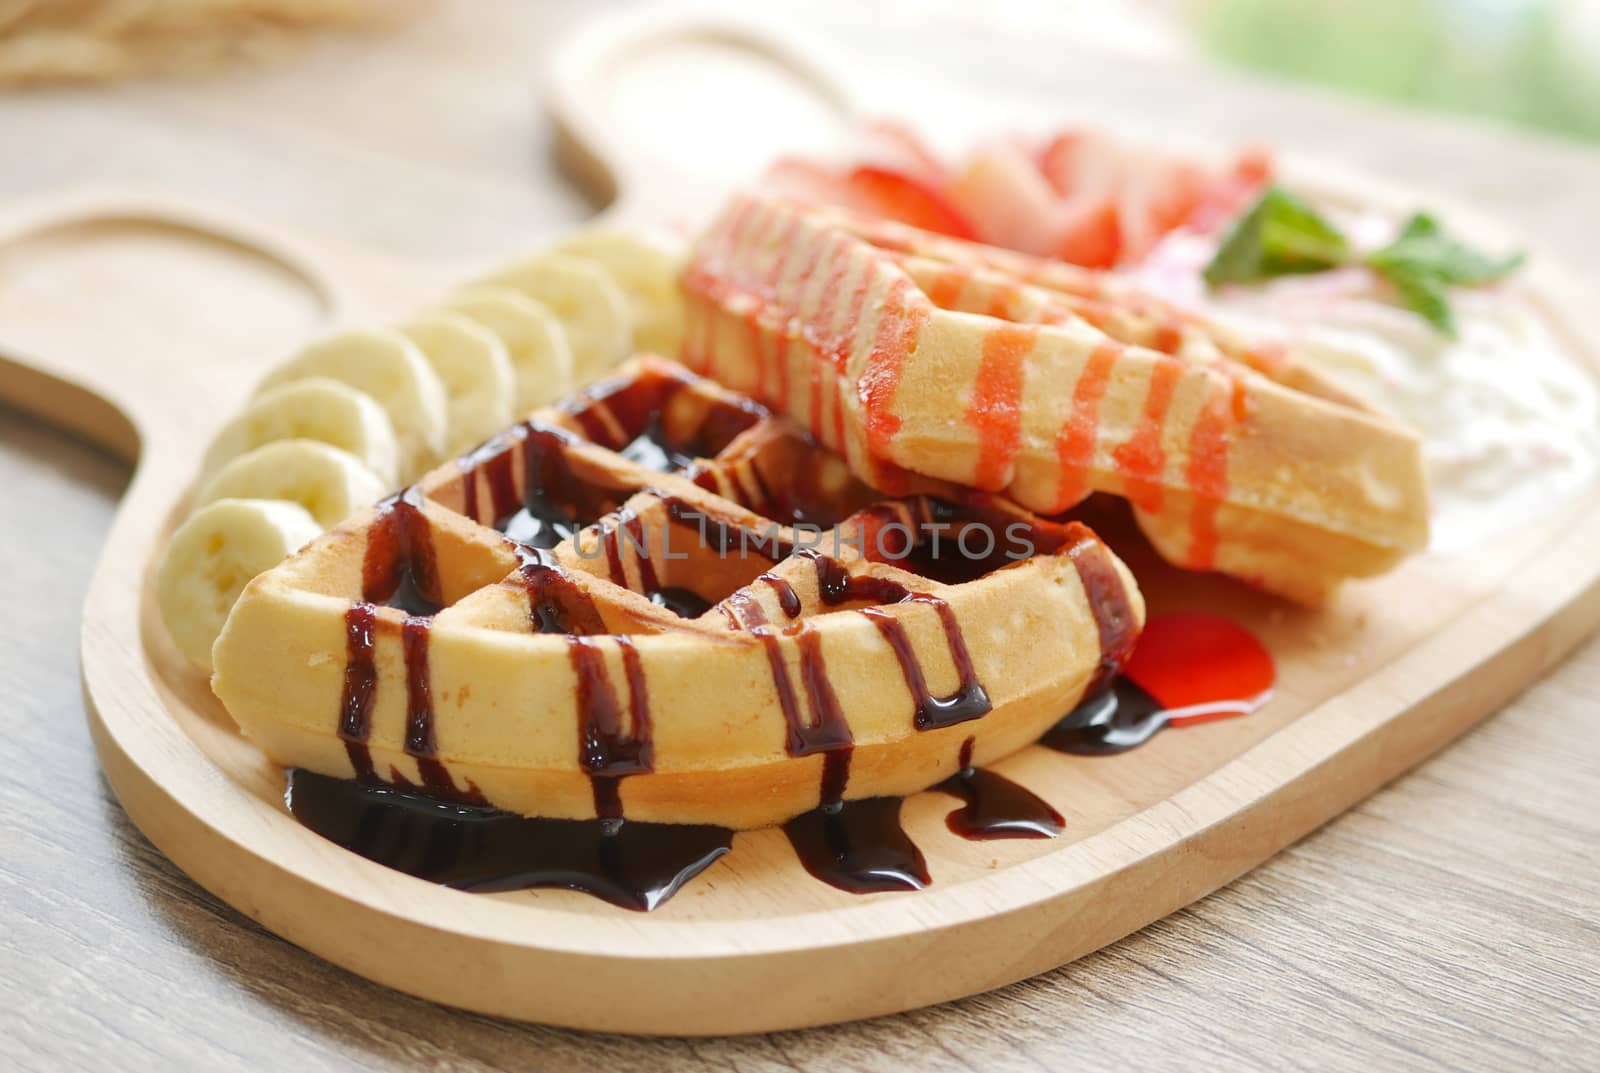 tasty waffle topped with strawberry syrup and chocolate sauce, side dishes are fresh strawberry chopped , banana , whipped cream and ice cream served on cute wooden plate